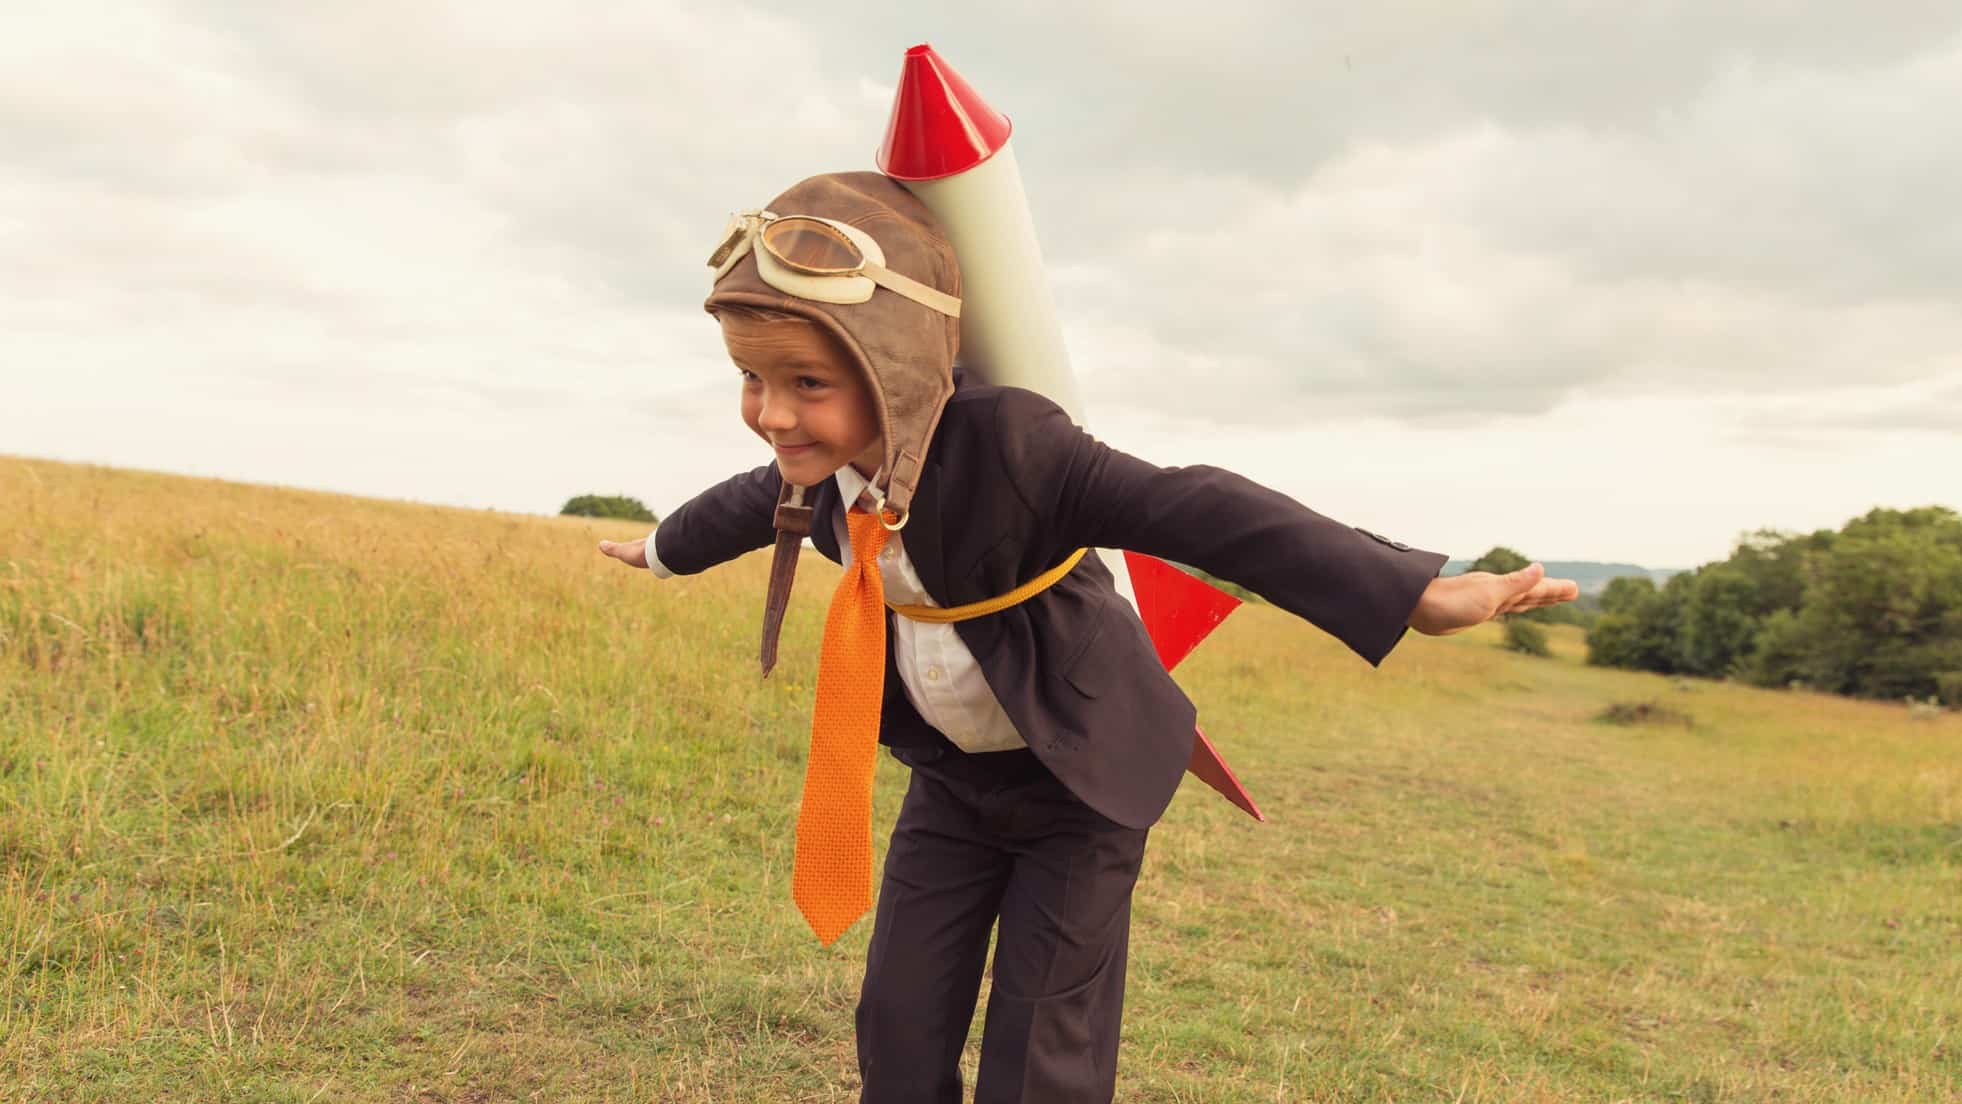 Boy dressed in business suit with rocket strapped to back ready to take off